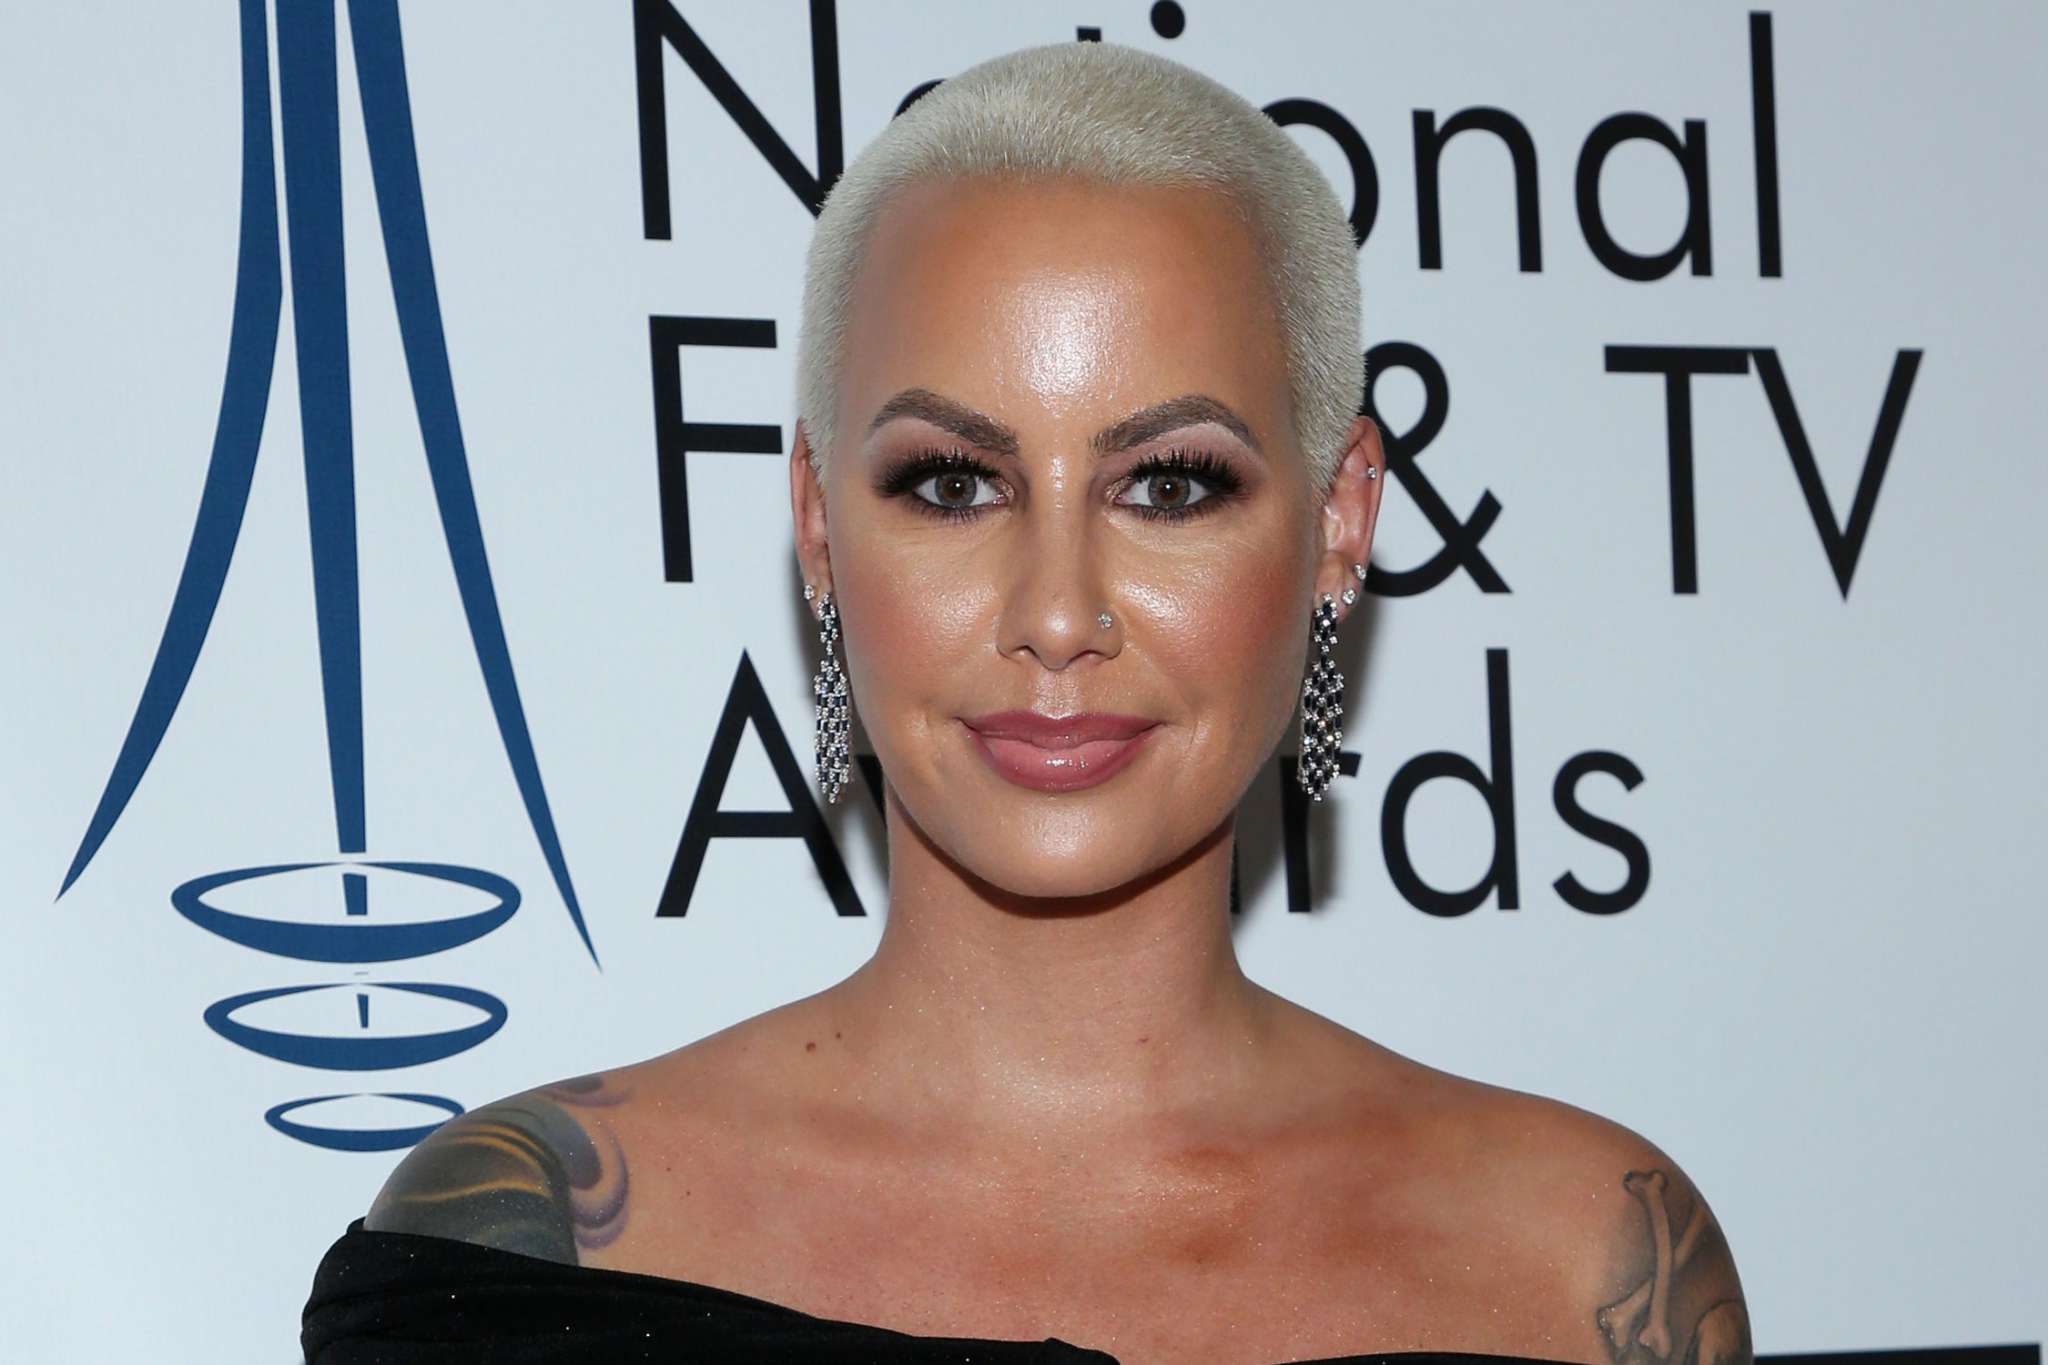 amber-rose-drops-a-message-for-t-i-says-she-stands-with-the-lgbtq-community